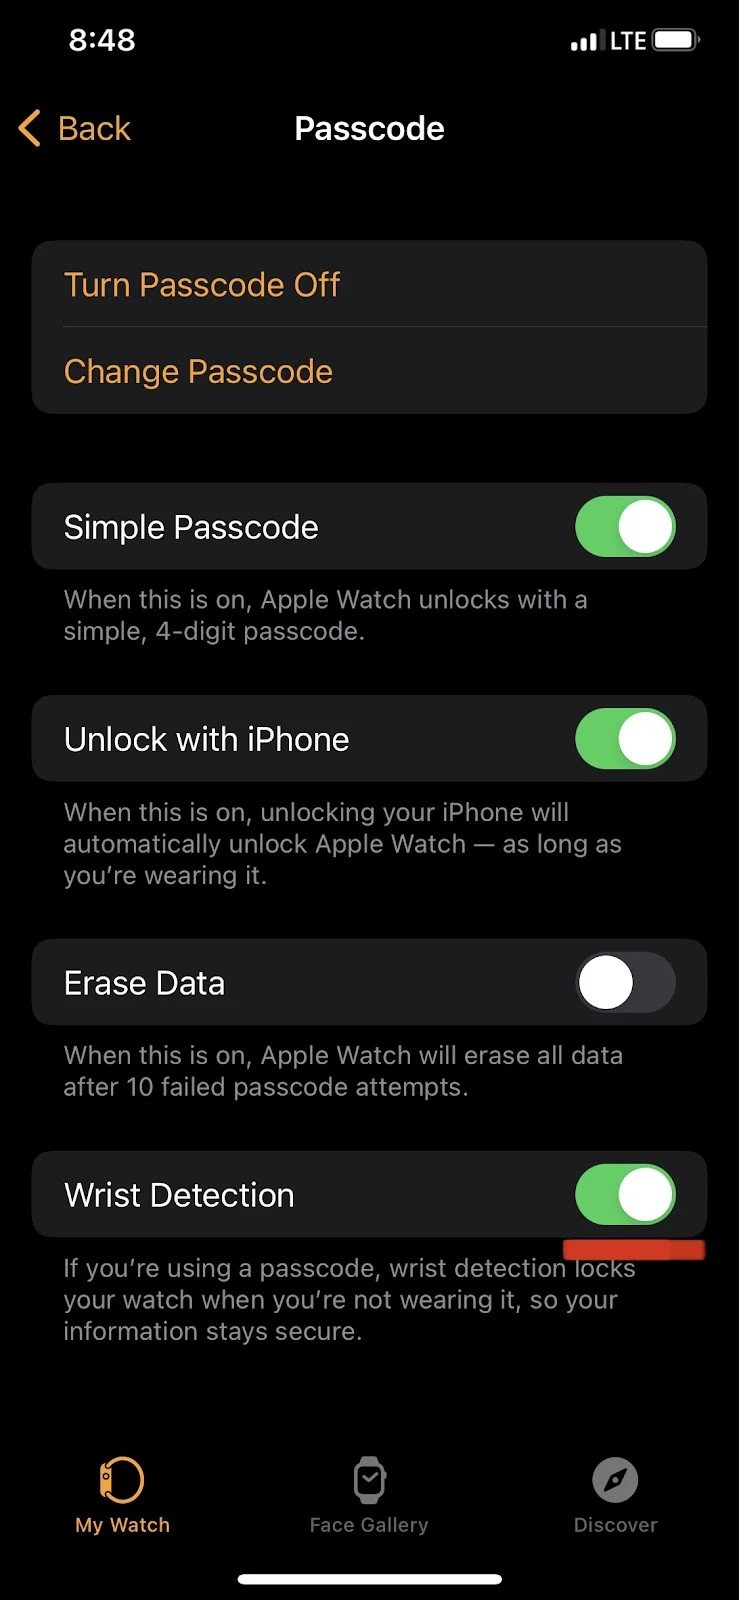 Apple Watch makes notification sounds but not iPhone